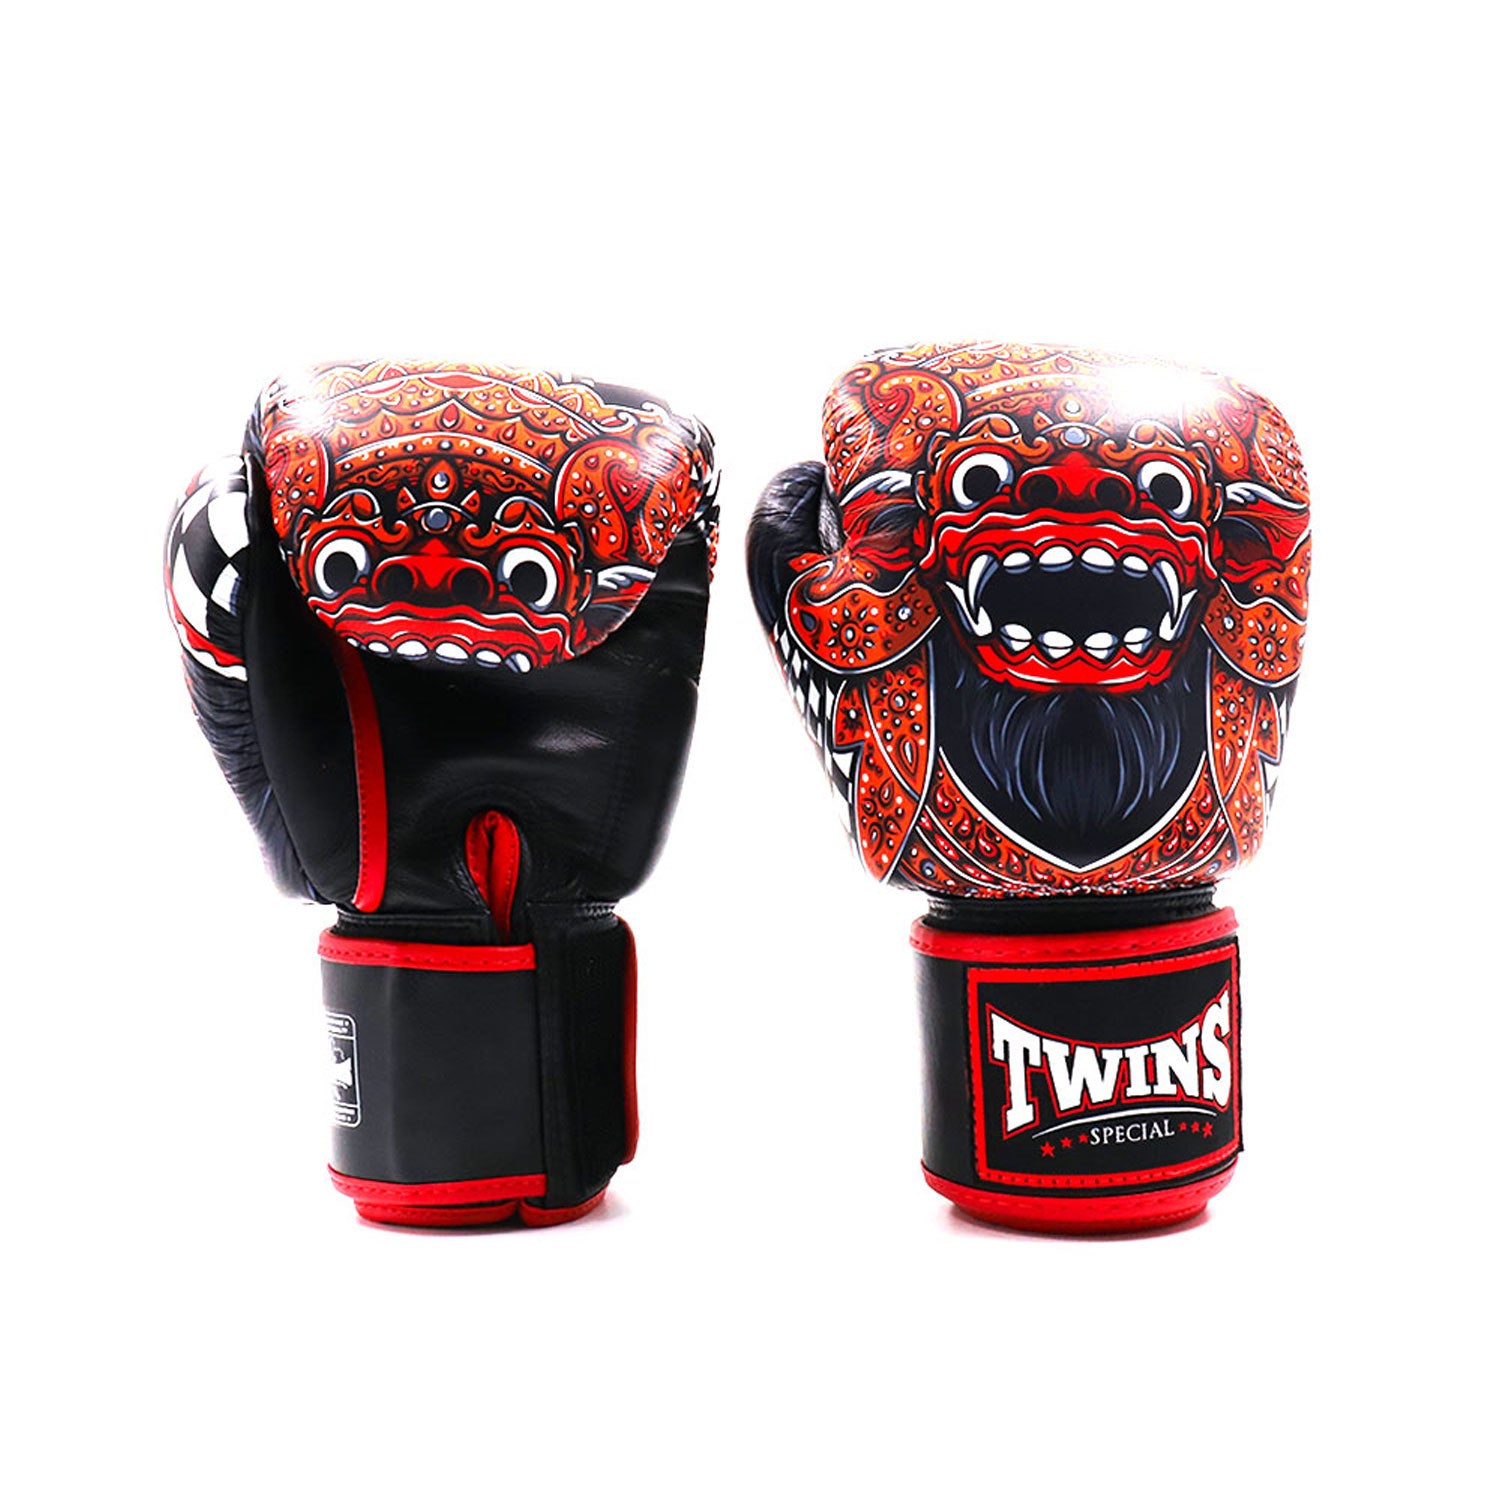 Image of FBGVL3-59 Twins Barong Boxing Gloves Black-Red